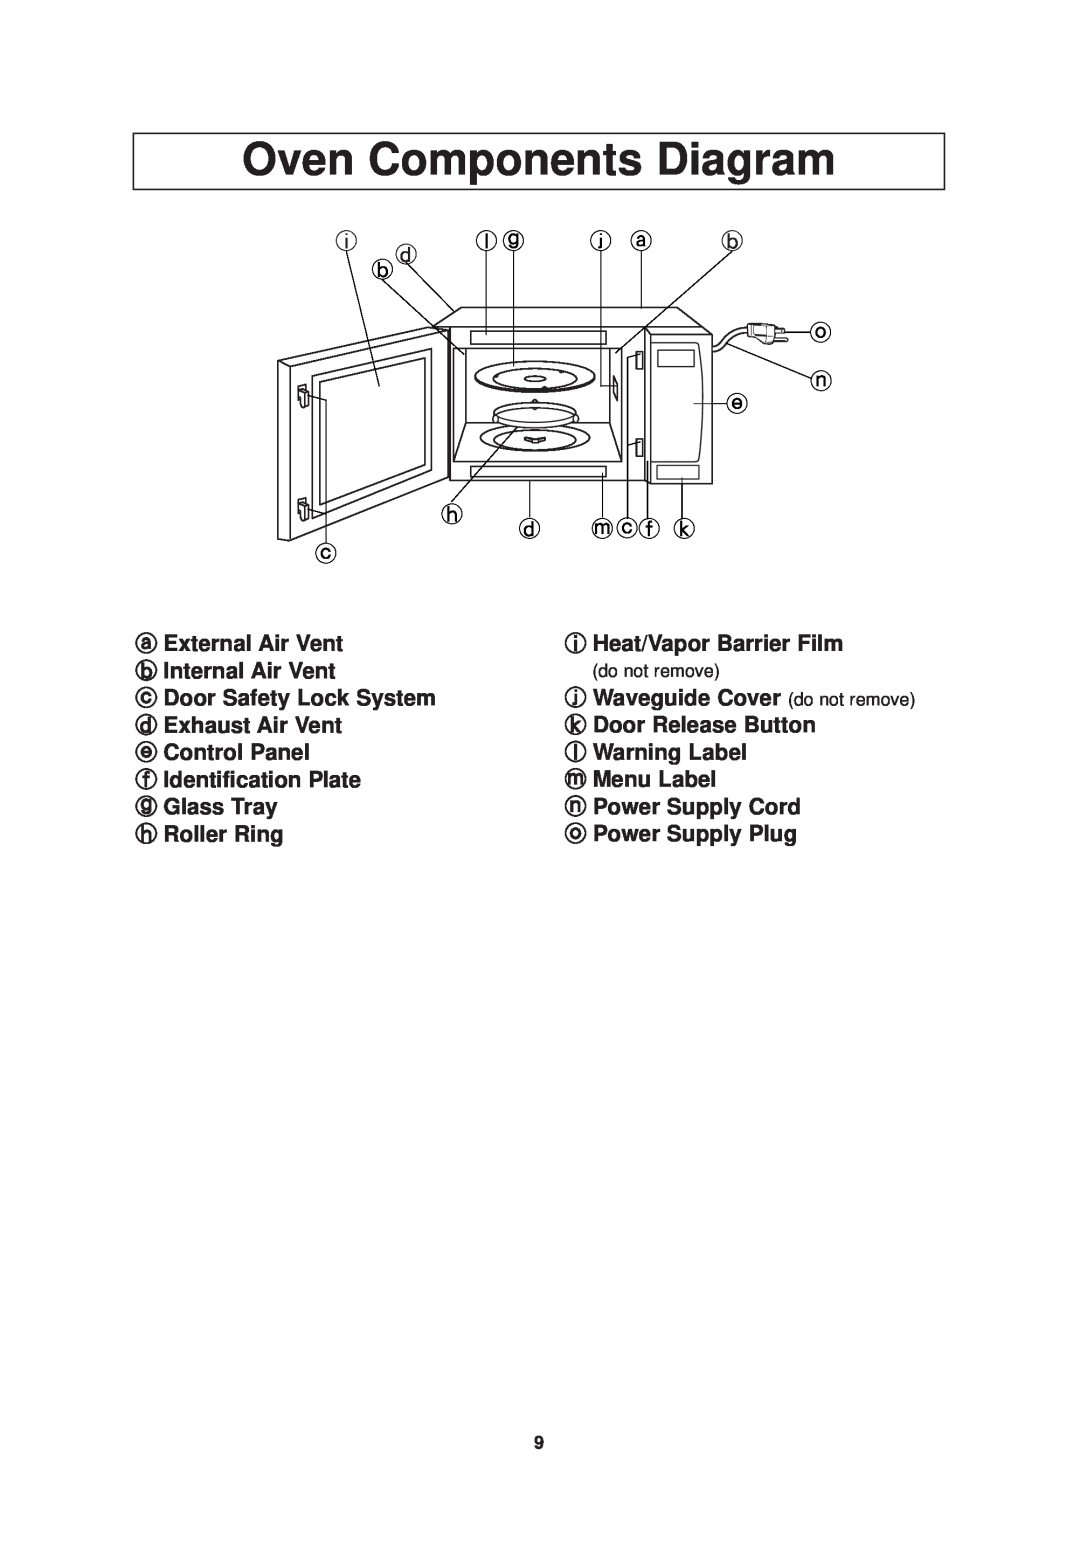 Panasonic NN-SN960S operating instructions Oven Components Diagram 